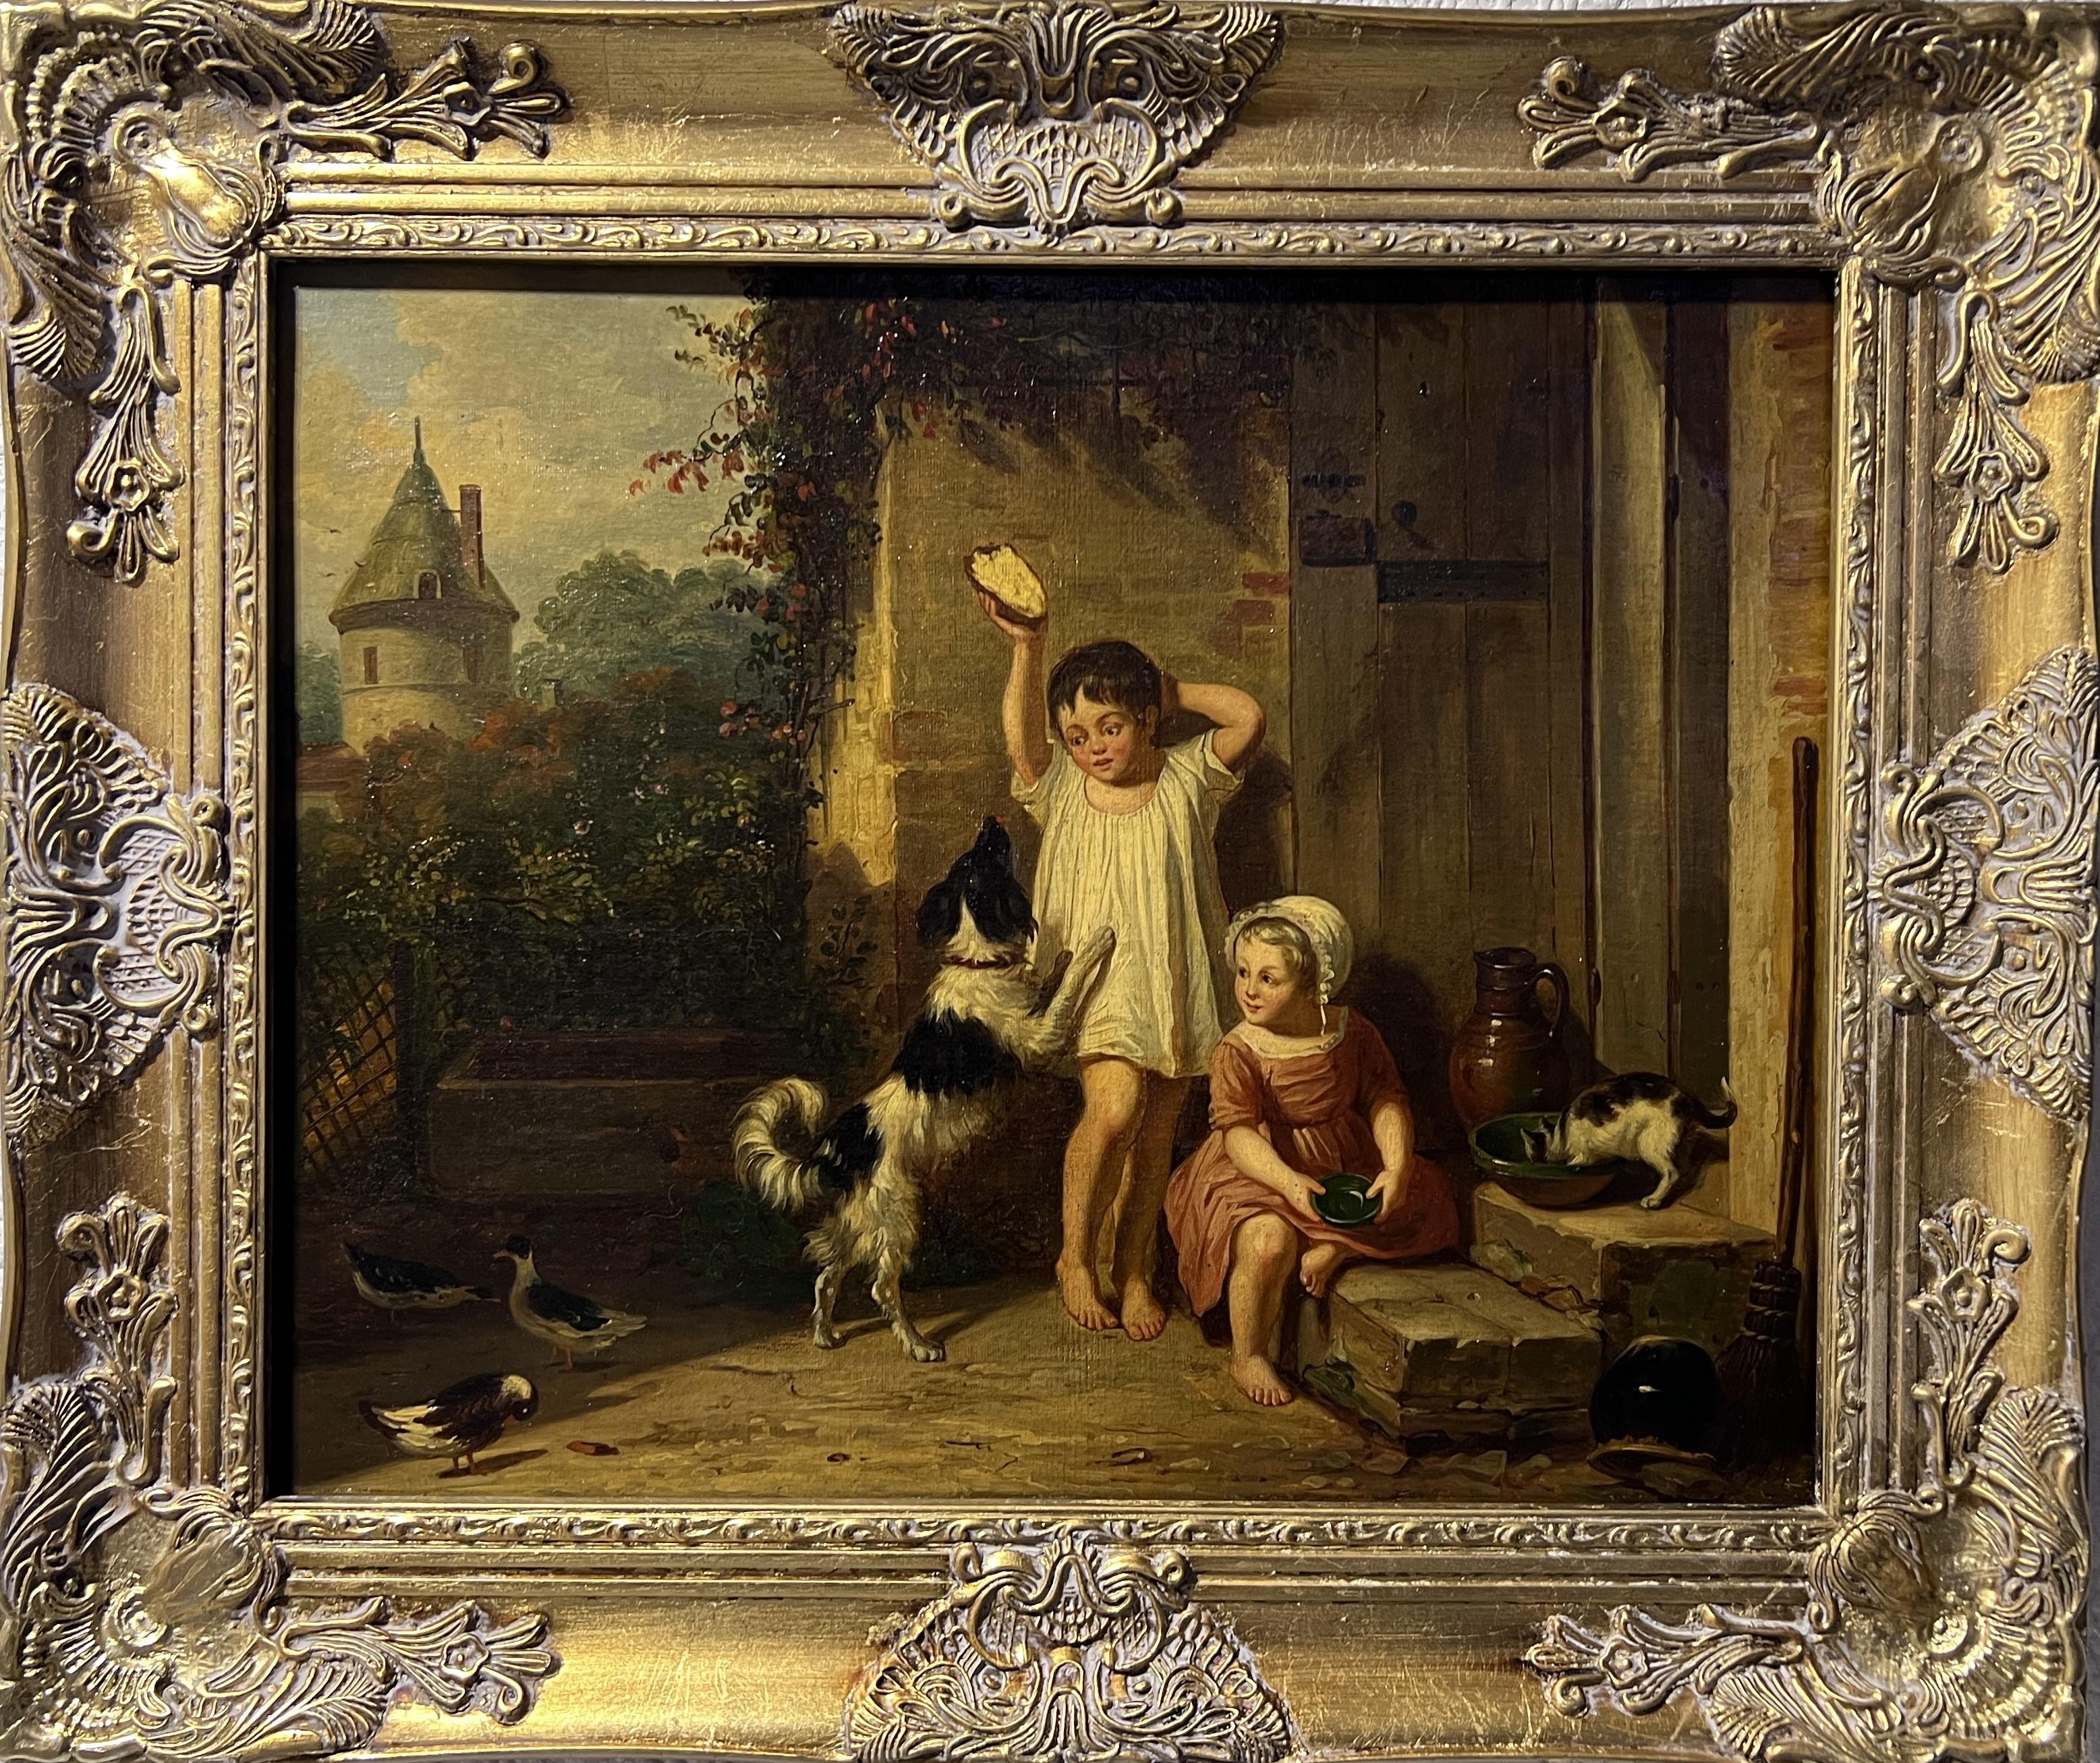 Unknown Figurative Painting - Antique 19th century Original oil painting on canvas, Children with pets, Framed